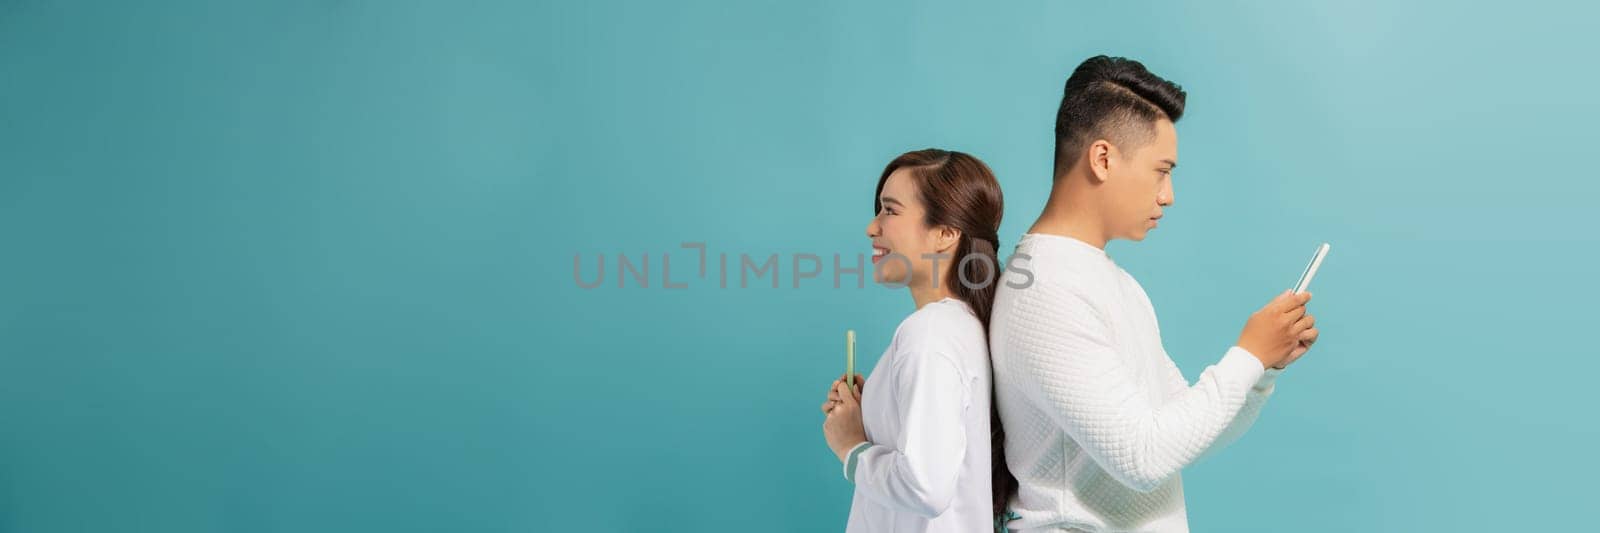 Young Asian woman with man standing on blue while using smartphone and waiting for attention